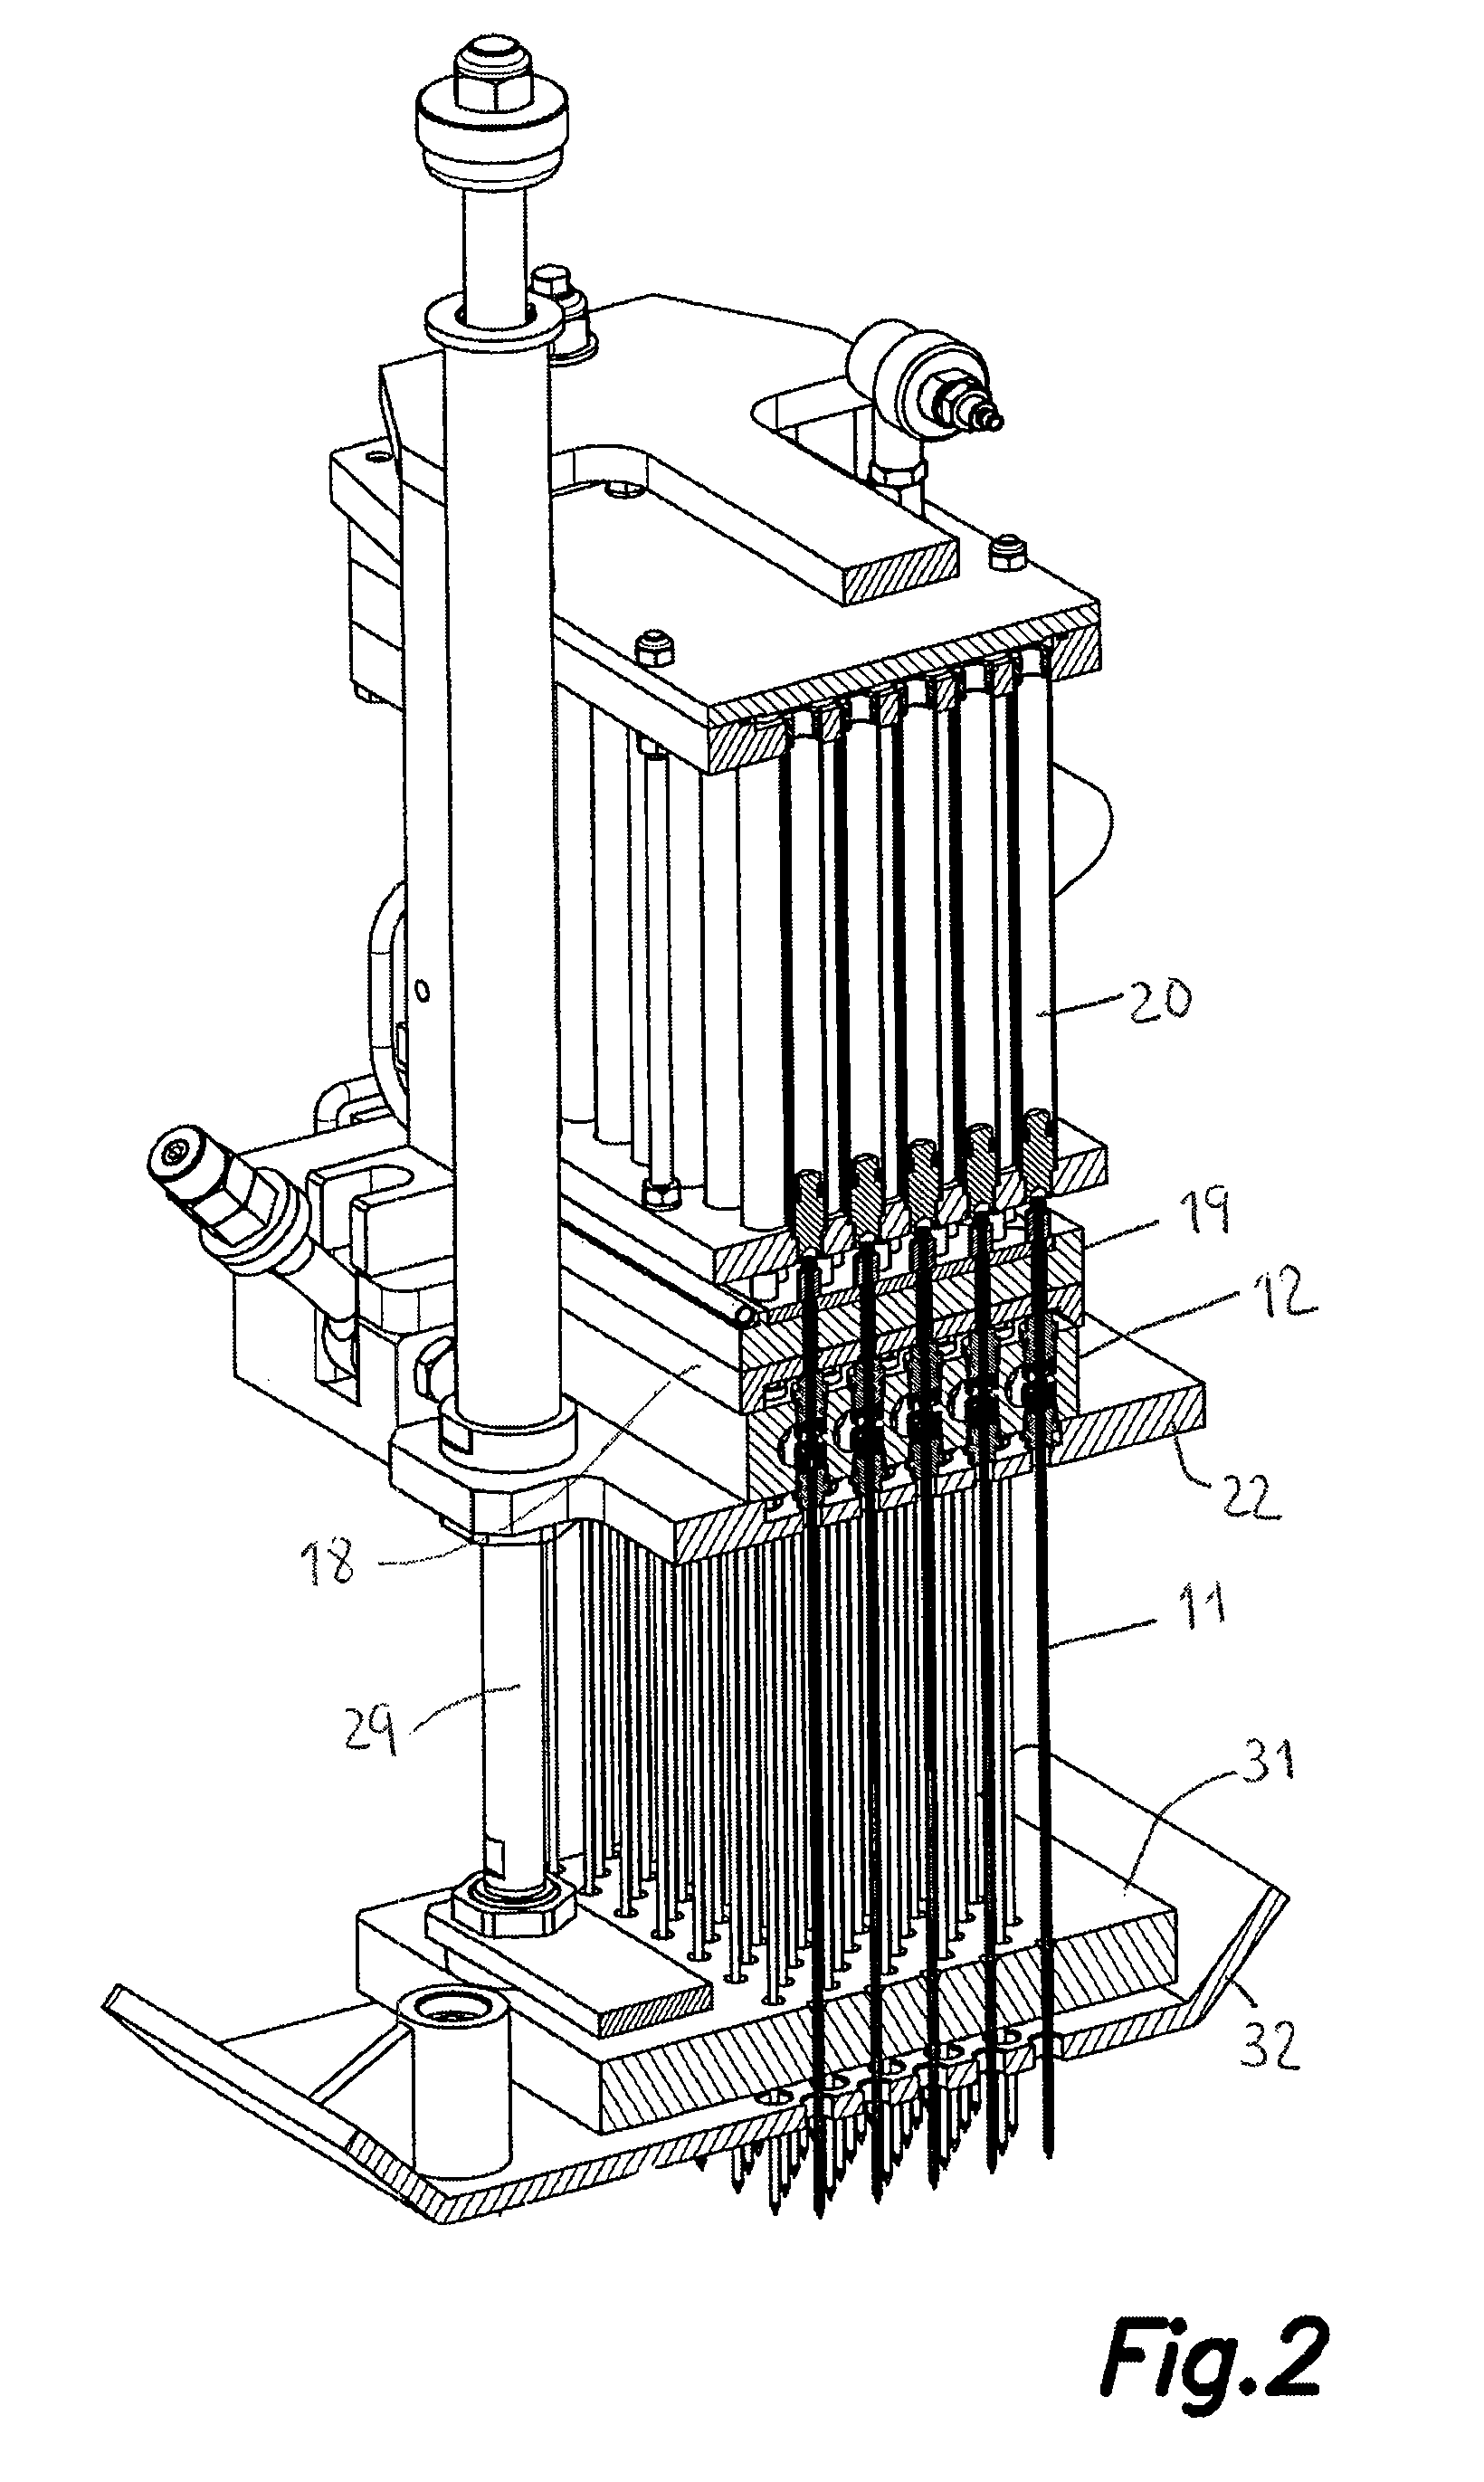 Machine for injecting fluids into meat or fish products